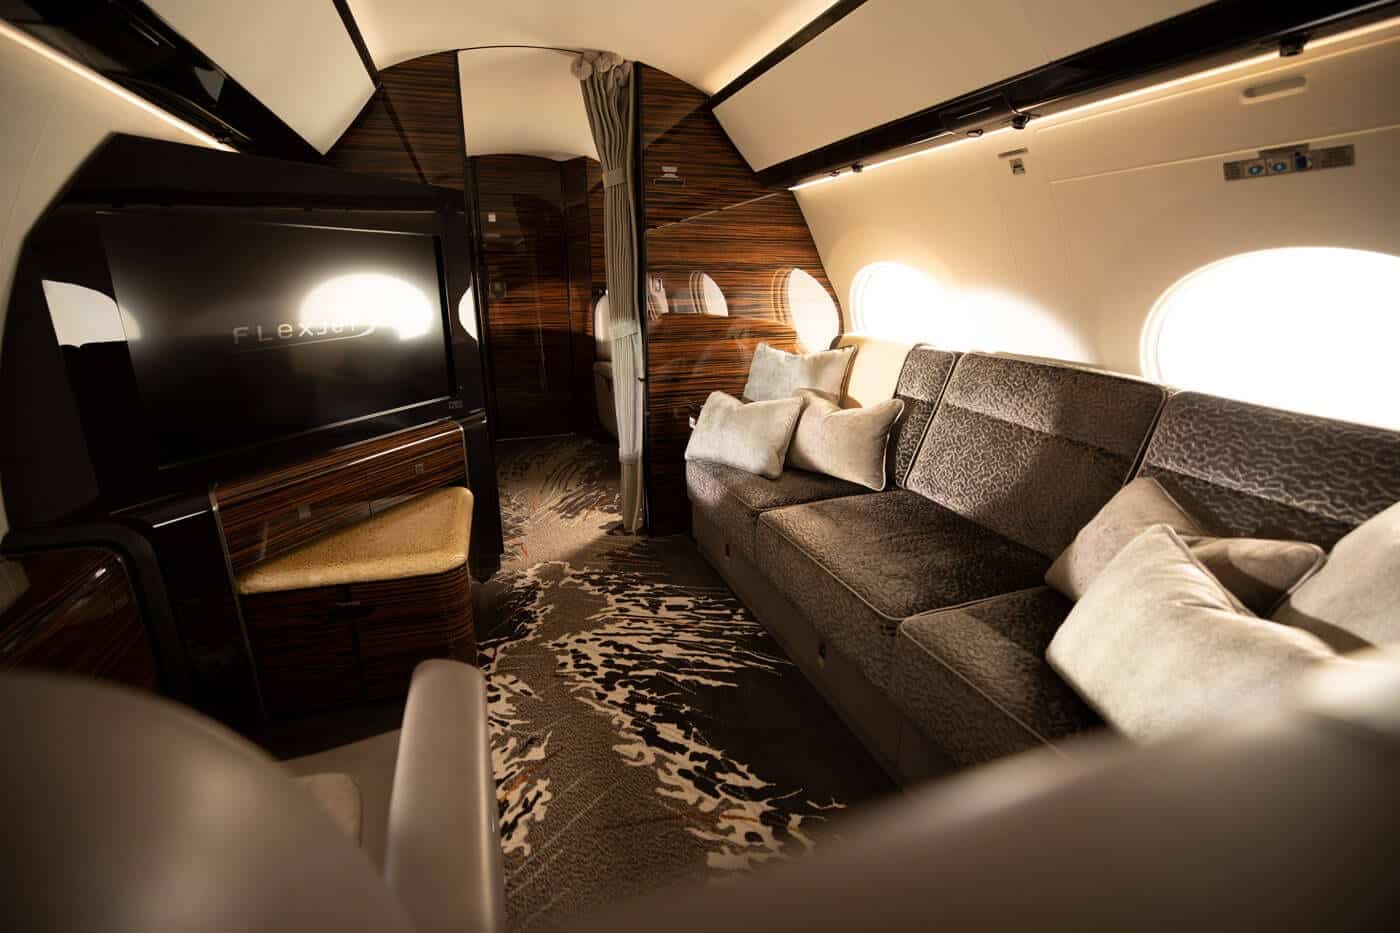 LXi Cabin Collection, Gulfstream G650, Ultra Long Range, Cosmos Interior, Flexjet, leather seating, jet interior, private jet, entertainment zone, cabin interior, cabin view, television